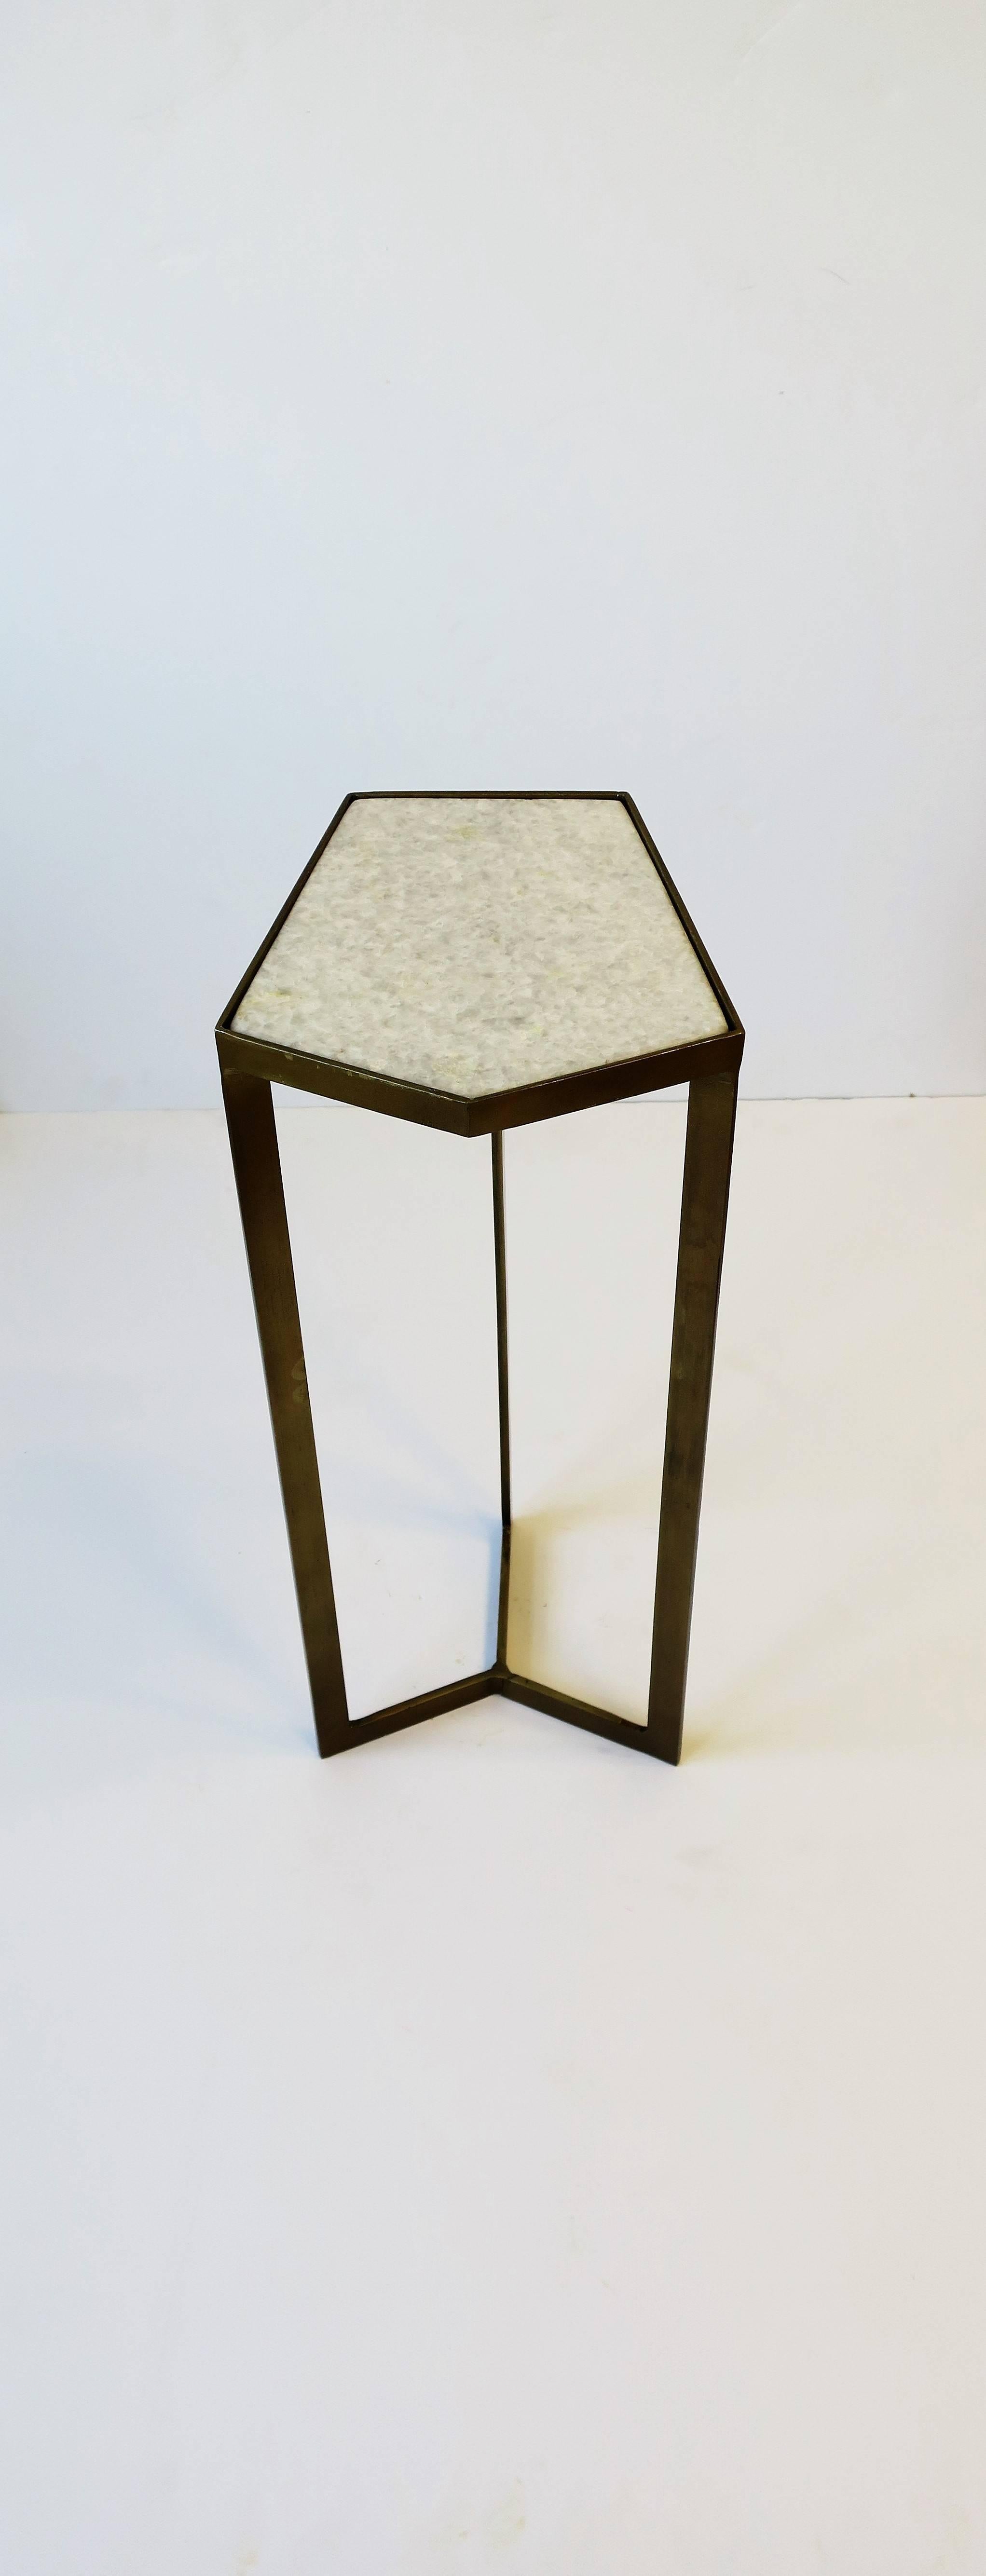 A Minimalist style geometric matte gold powder-coated metal side or drinks table with a white granite marble stone top. A small and convenient side/drinks table. In situation, please see images #18 and 19. 

Table measures: 7